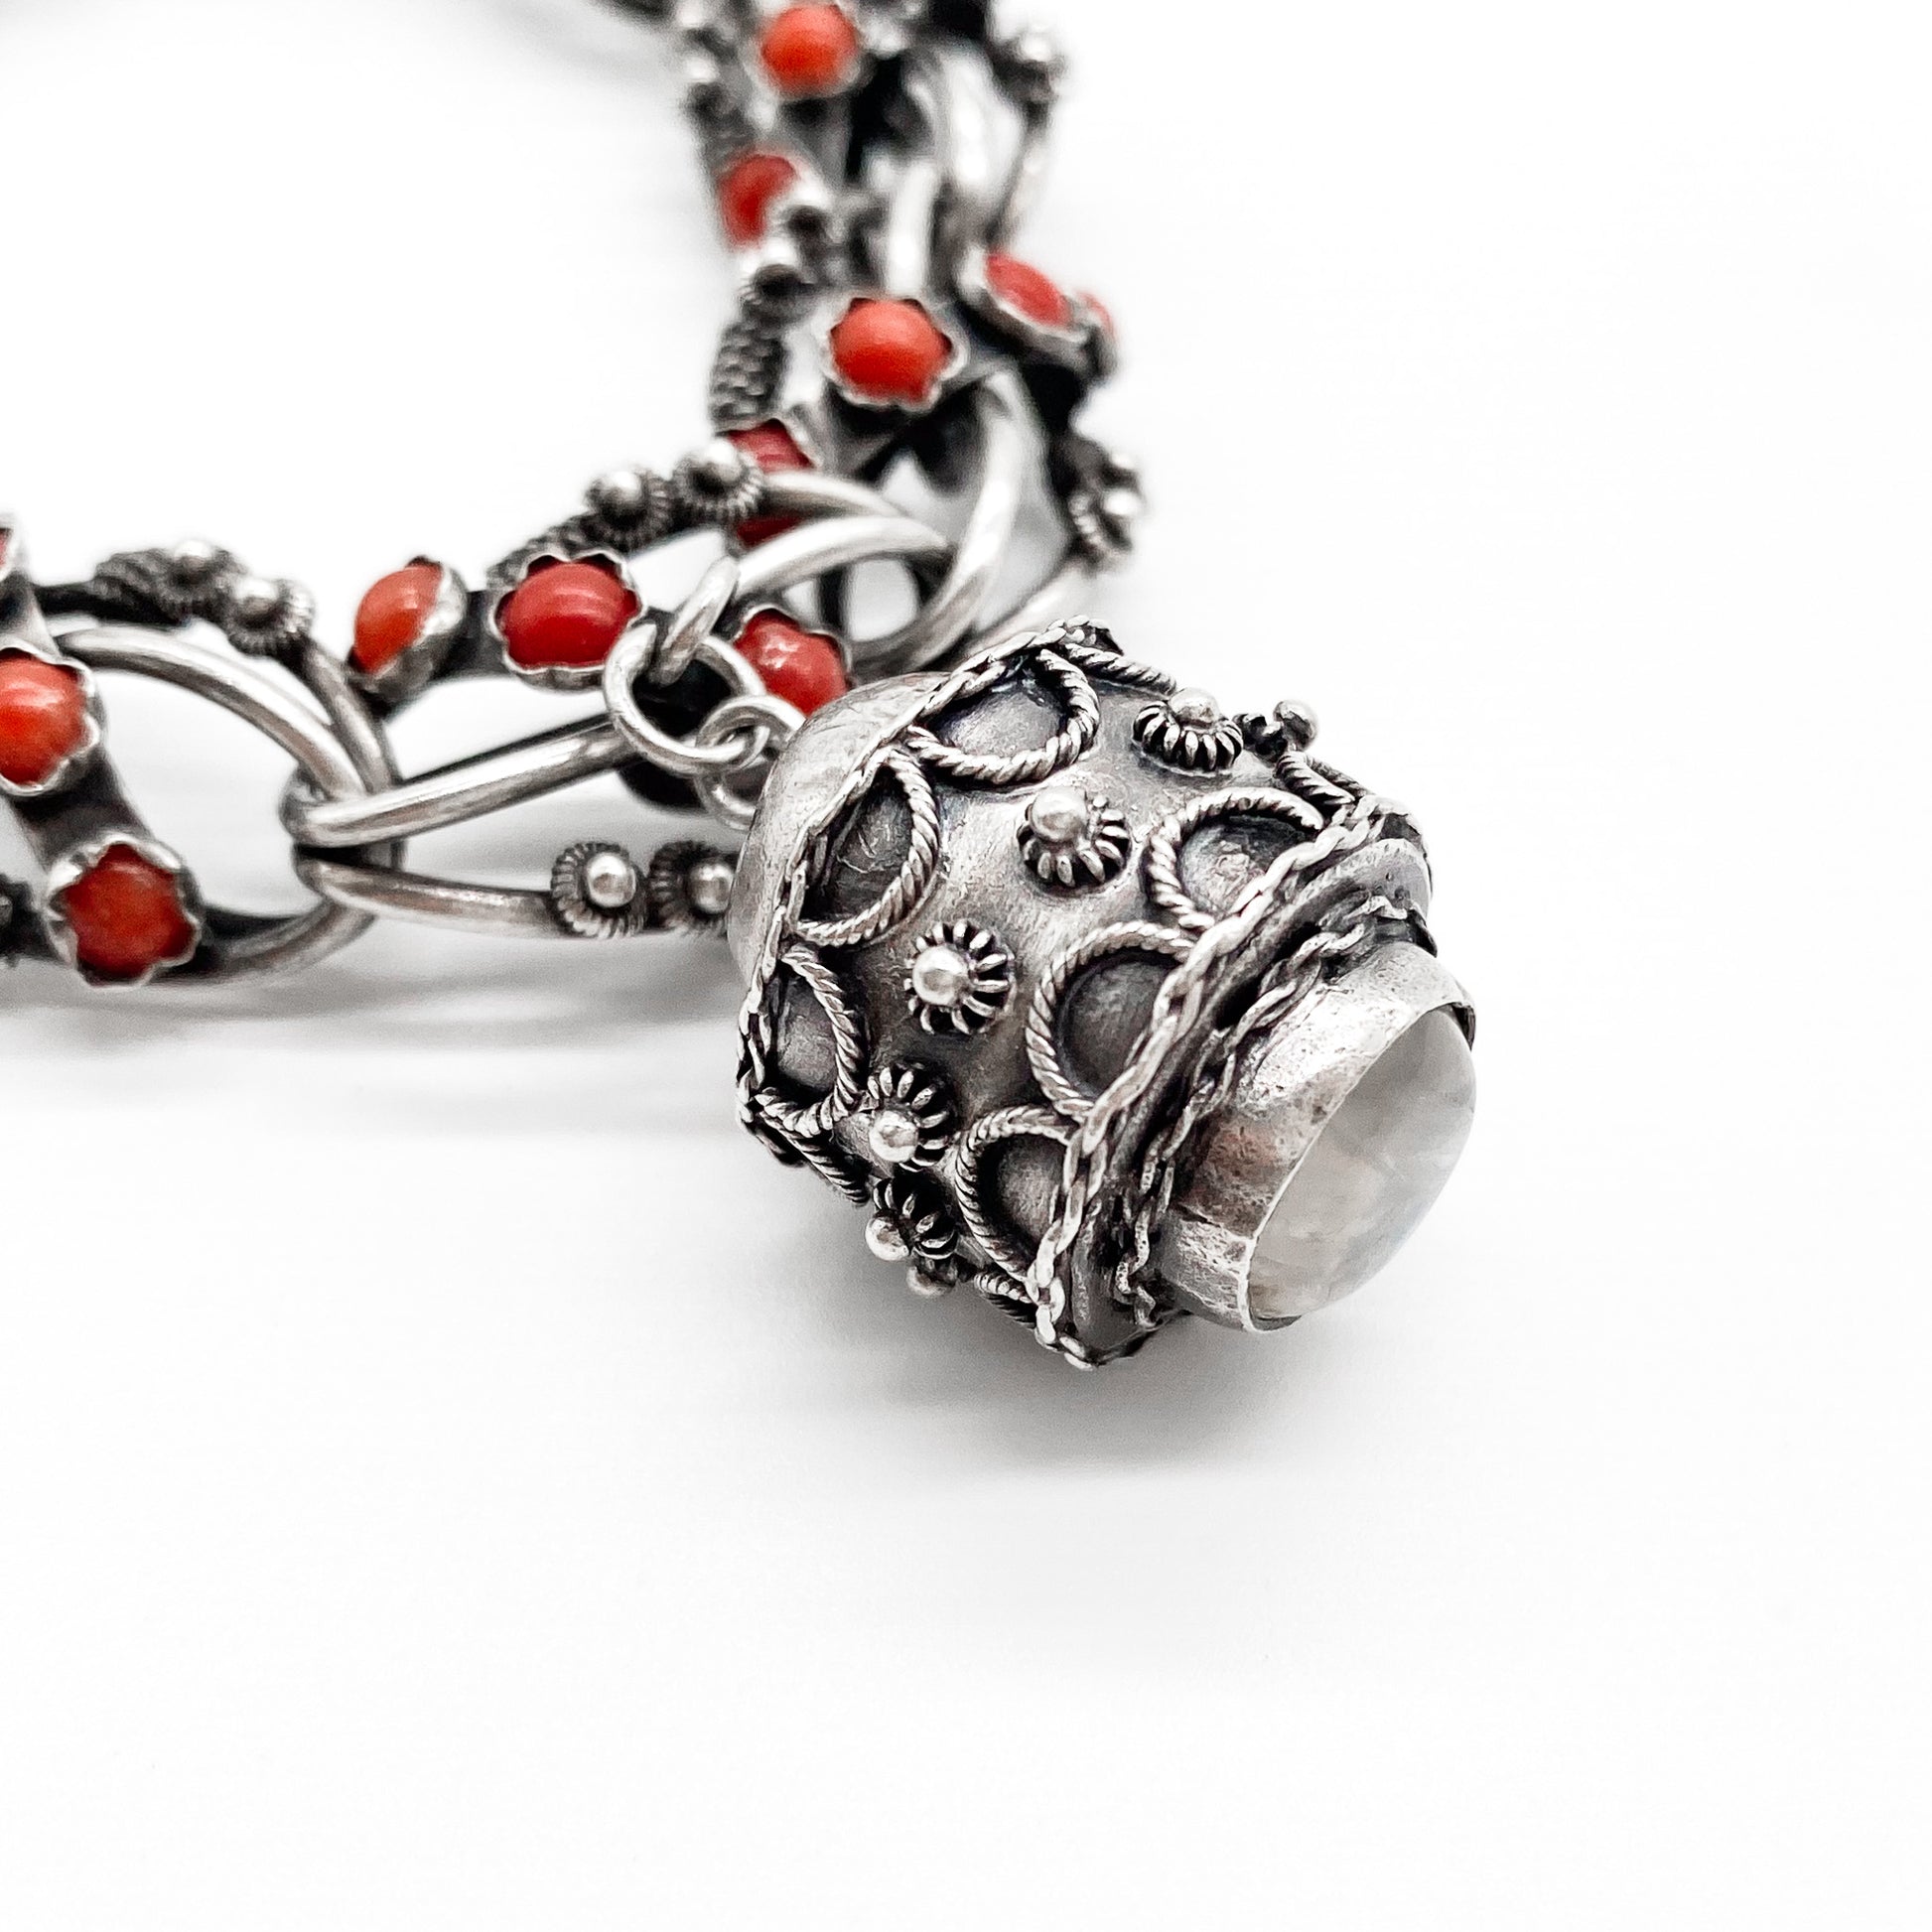 Stunning silver filigree bracelet set with thirty-six natural coral cabochons and three large charms set with coral, moonstone and chrysoprase. Italy